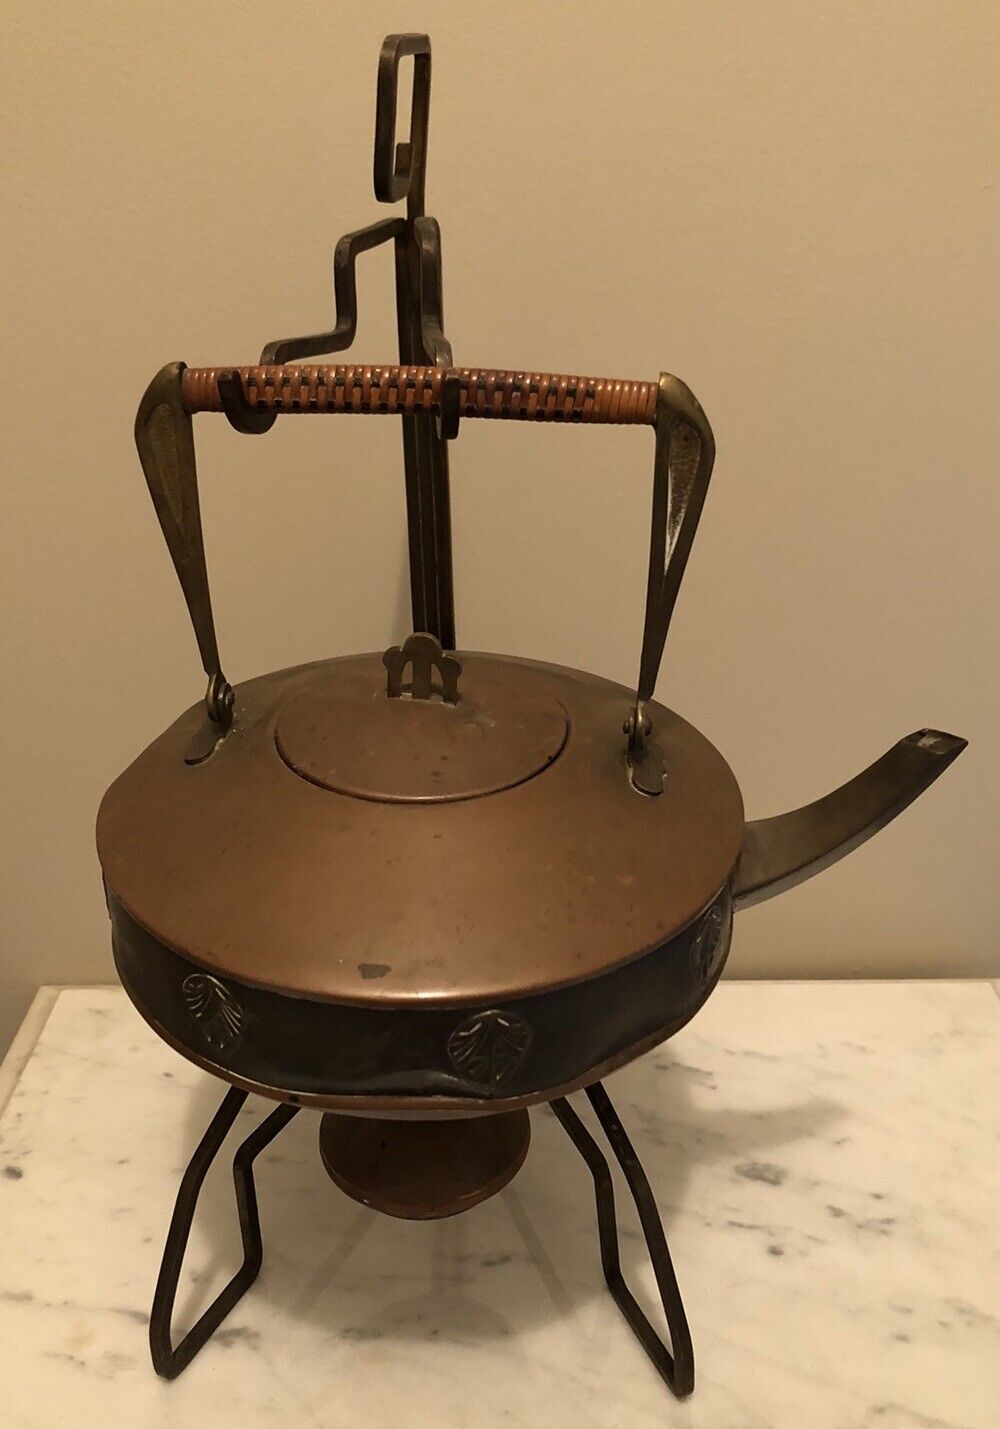 Antique Brass Plated Teapot With Wrought Iron Stand